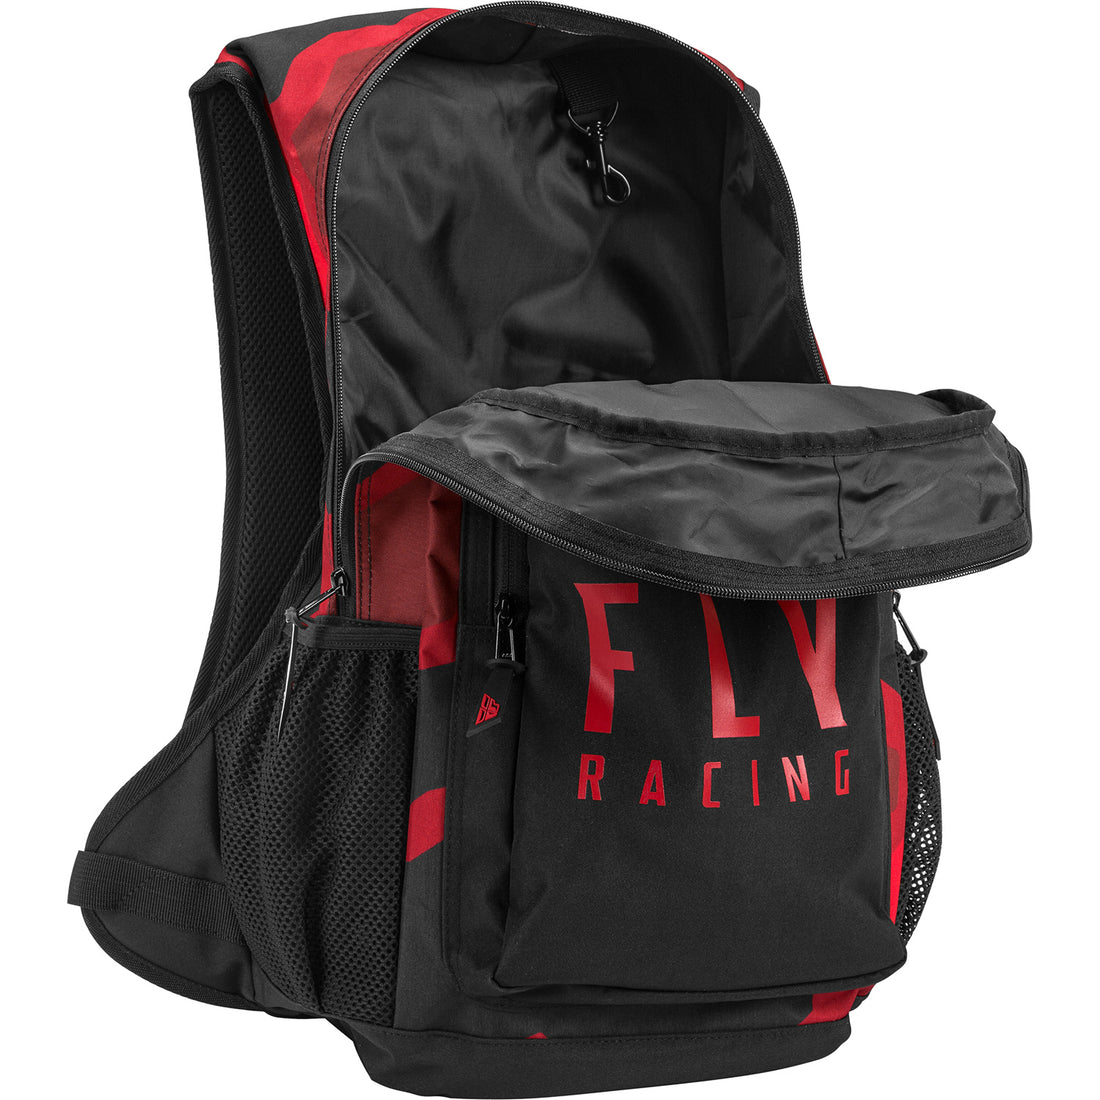 Fly Racing Jump Pack Backpack-Red/Black Camo at J&R Bicycles — J&R ...